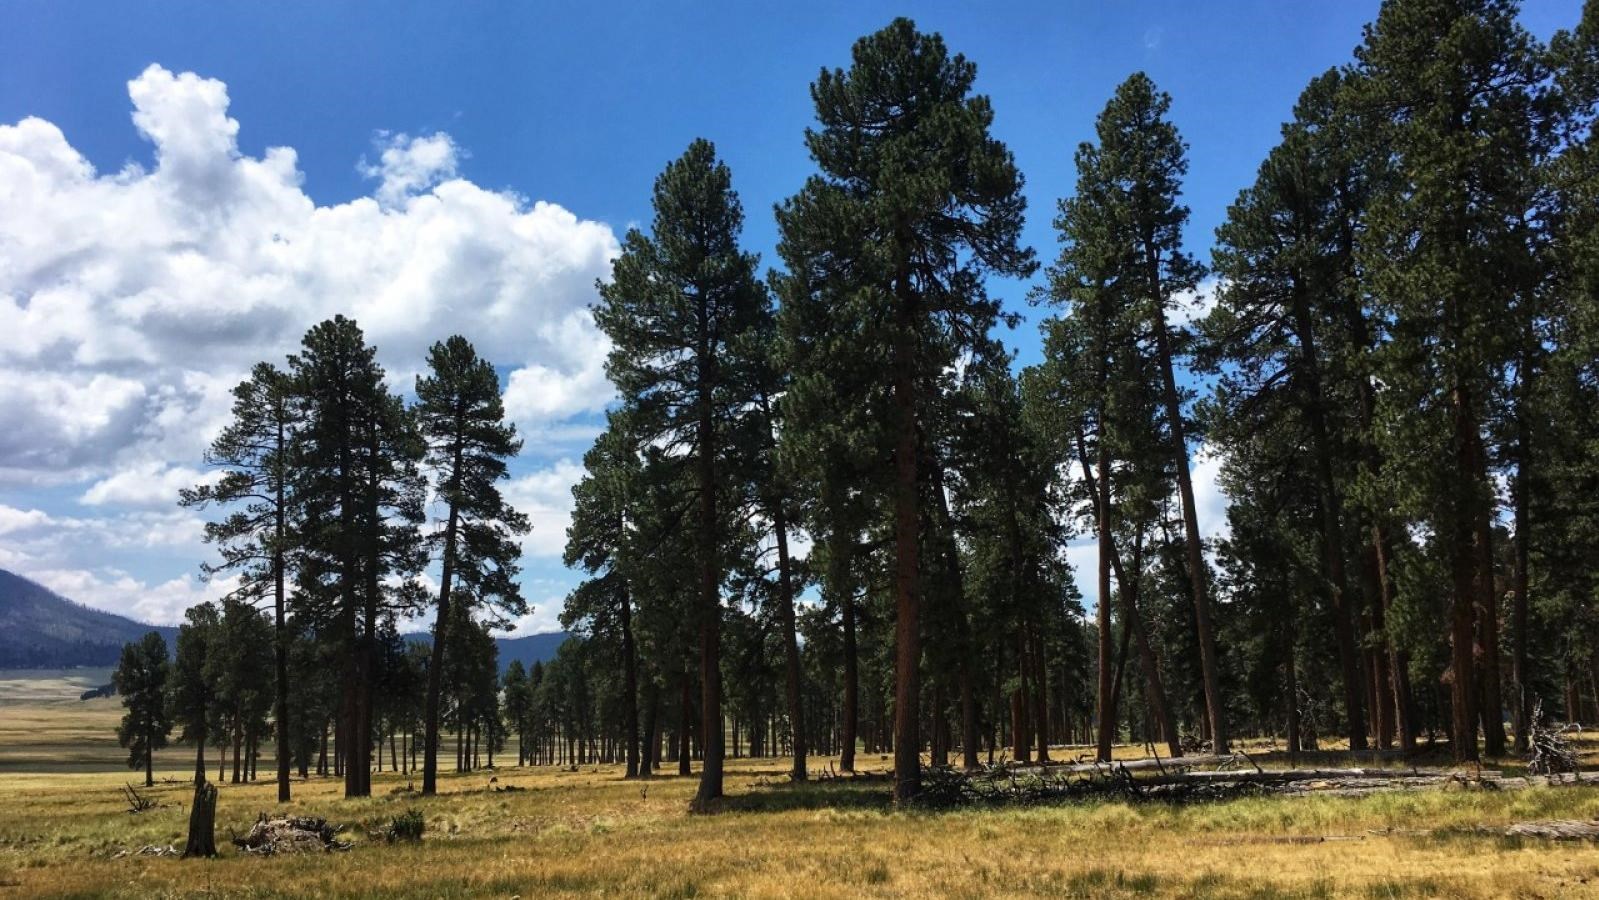 A grove of approximately 100 tall Ponderosa pine trees with clouds in the background.